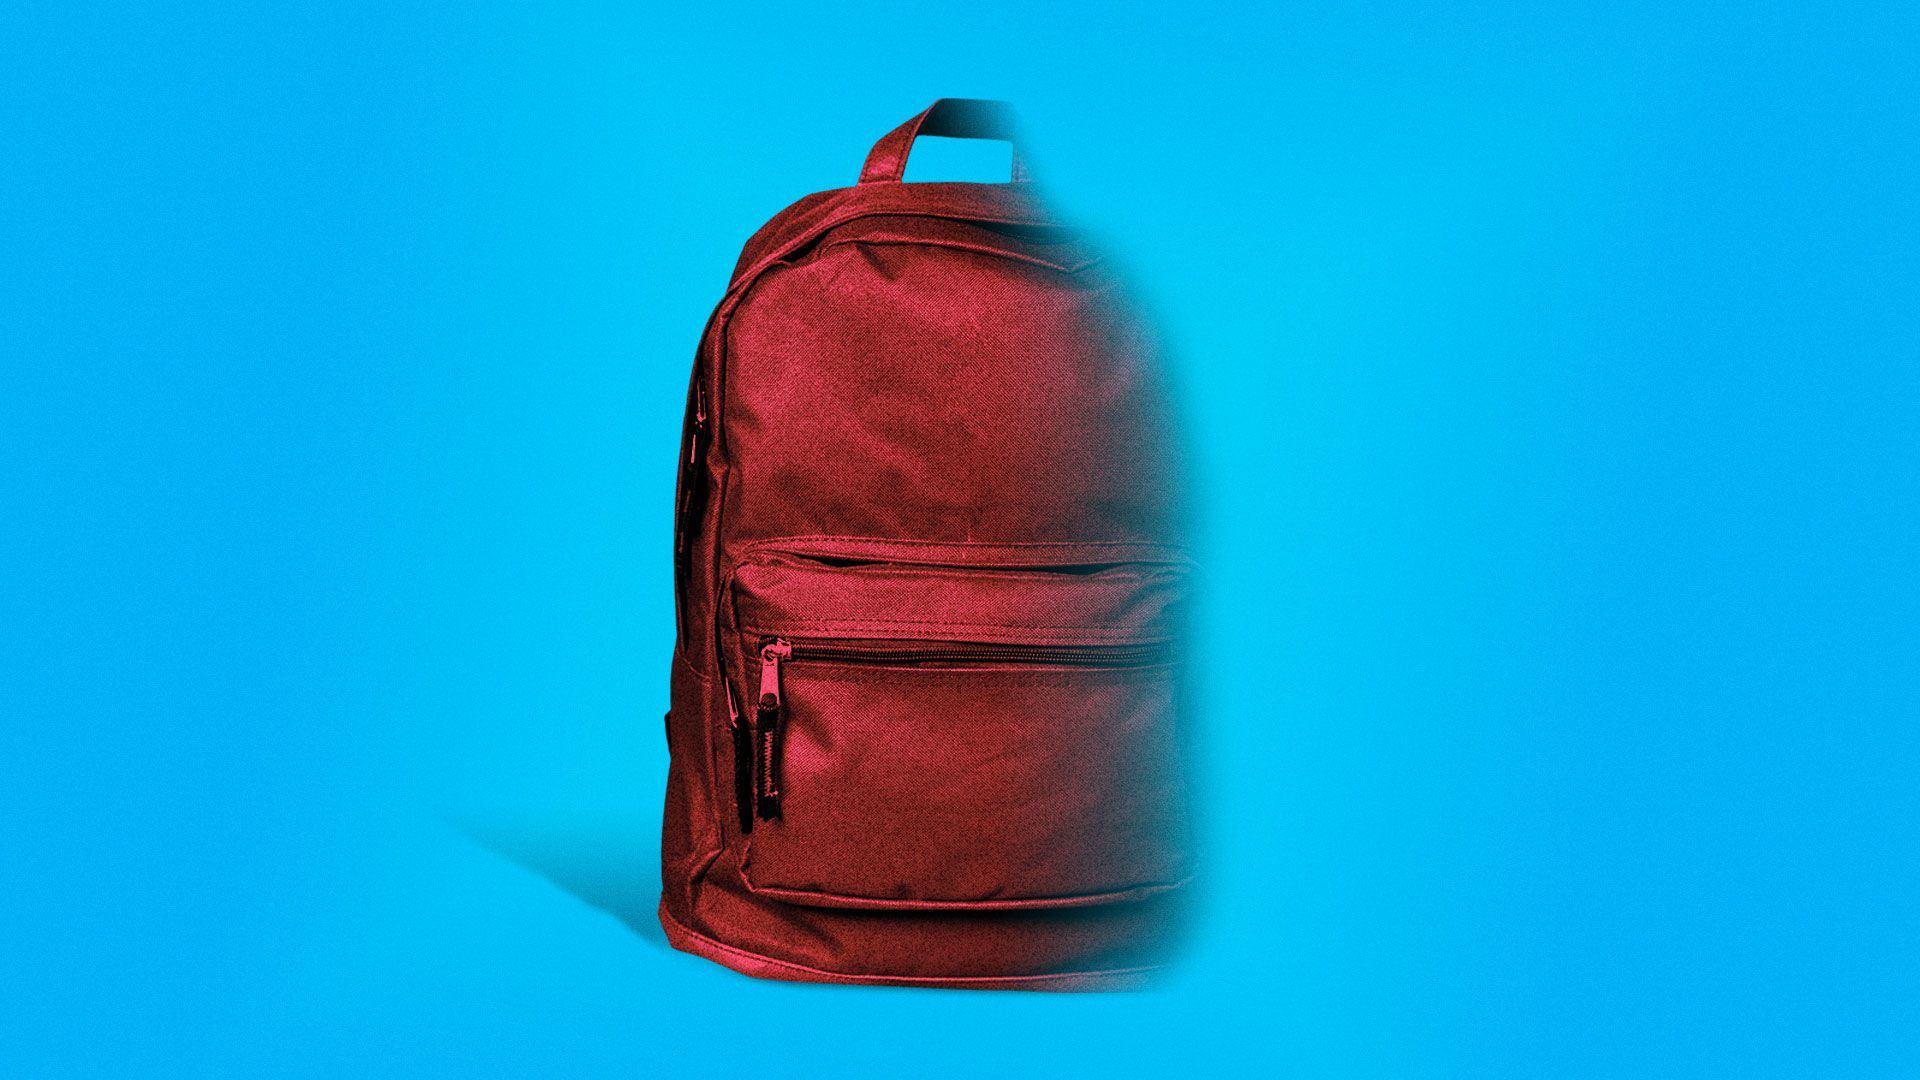 Illustration of disappearing backpack